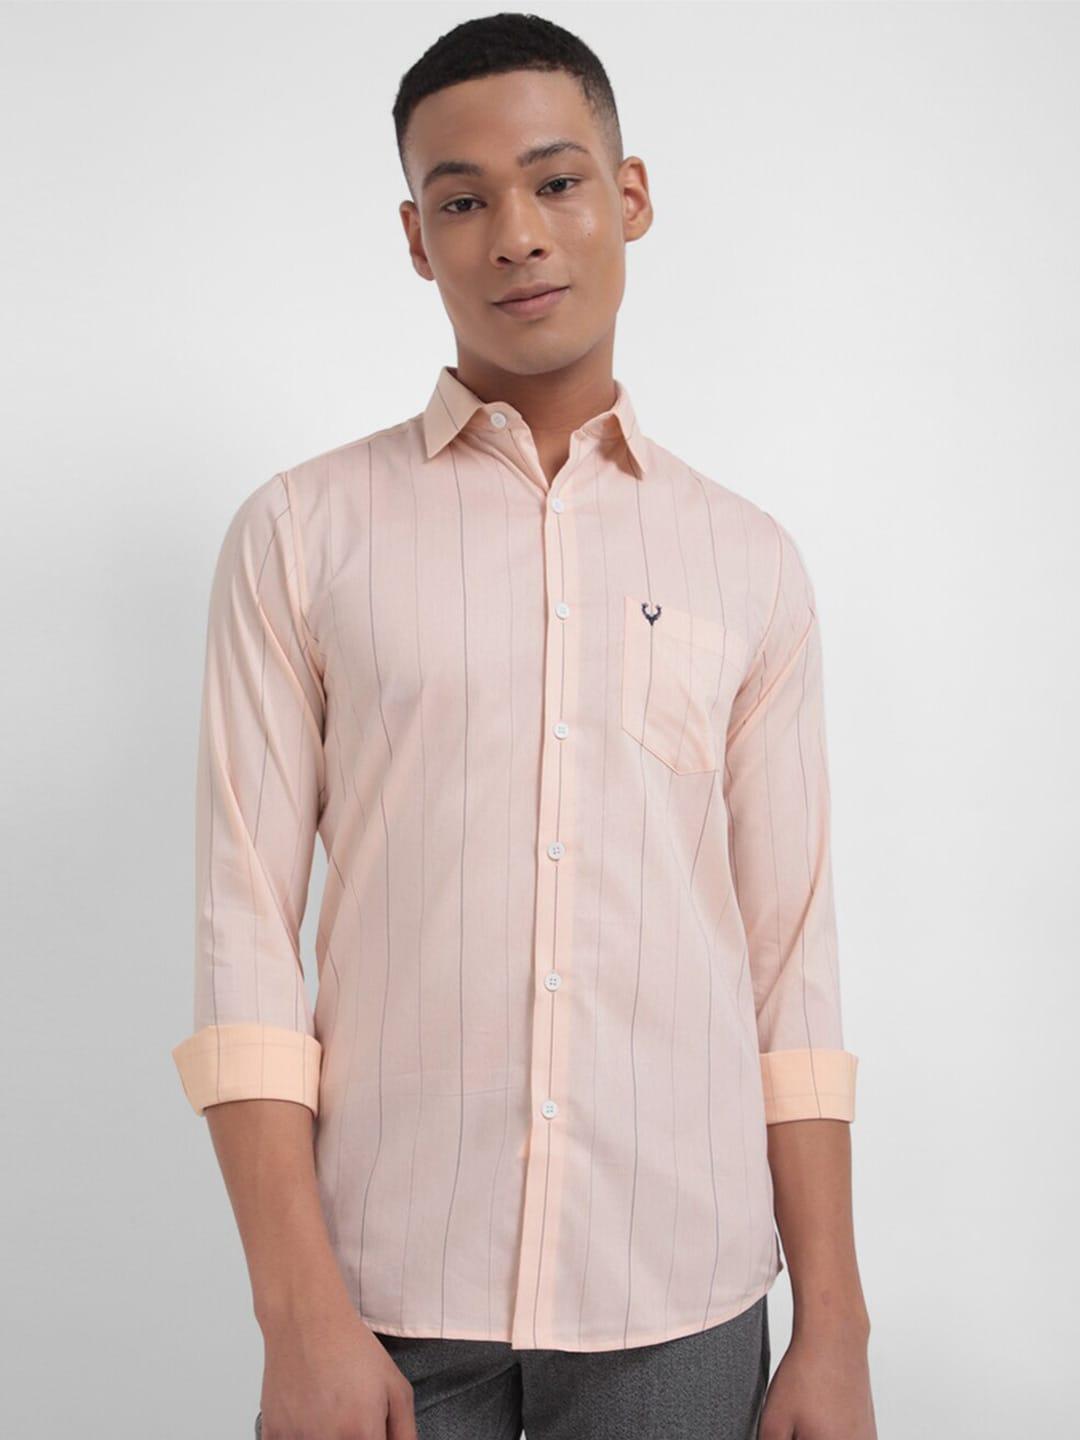 allen-solly-vertical-striped-slim-fit-casual-shirt